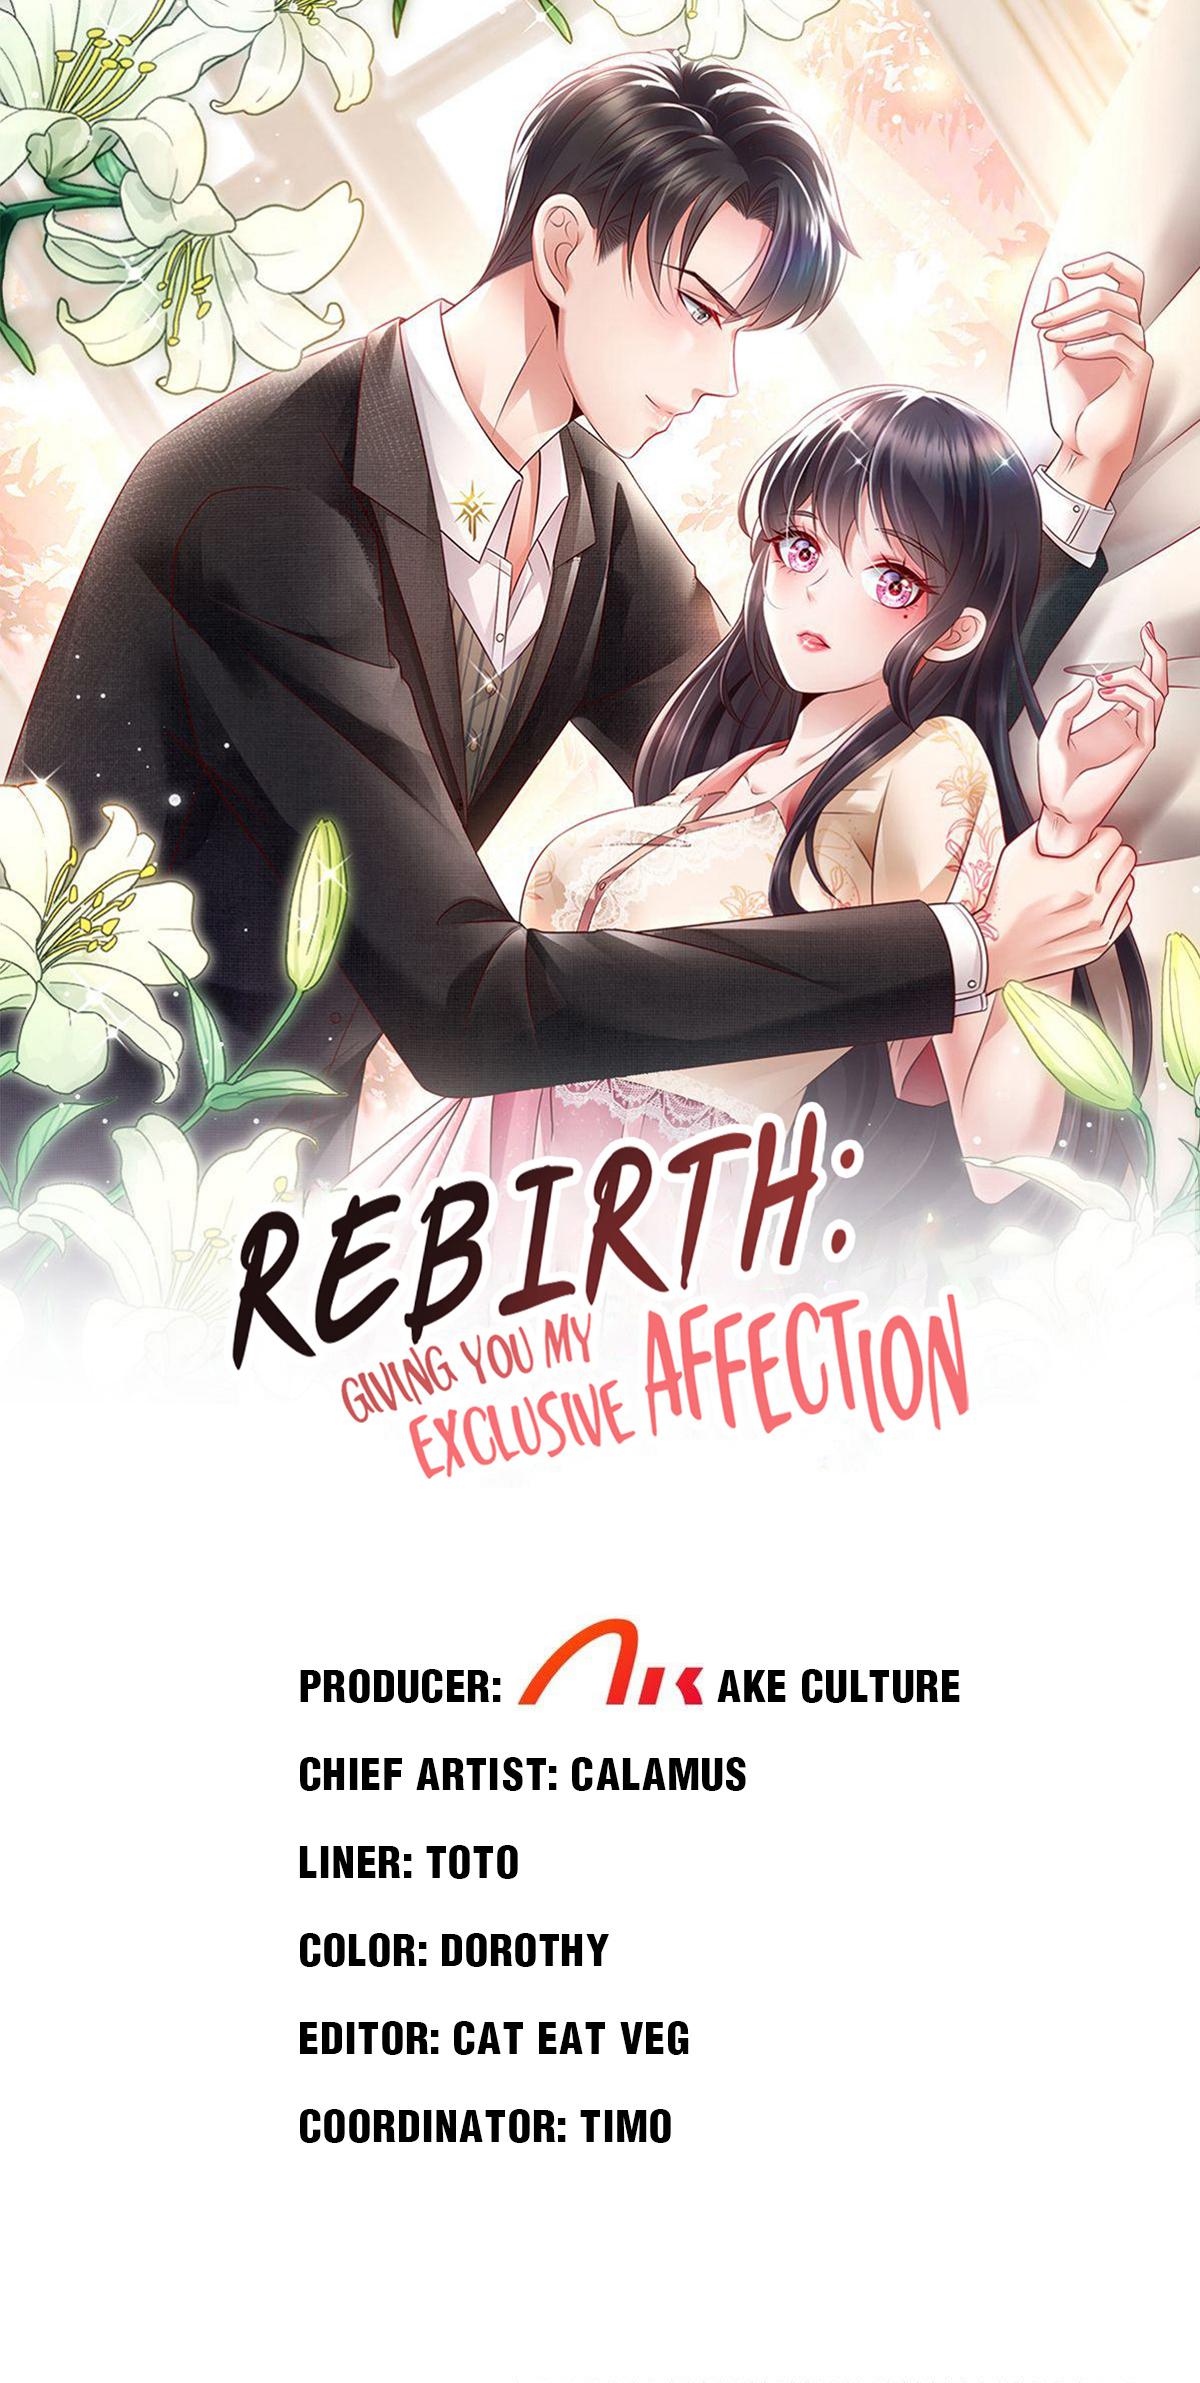 Rebirth: Giving You My Exclusive Affection 214